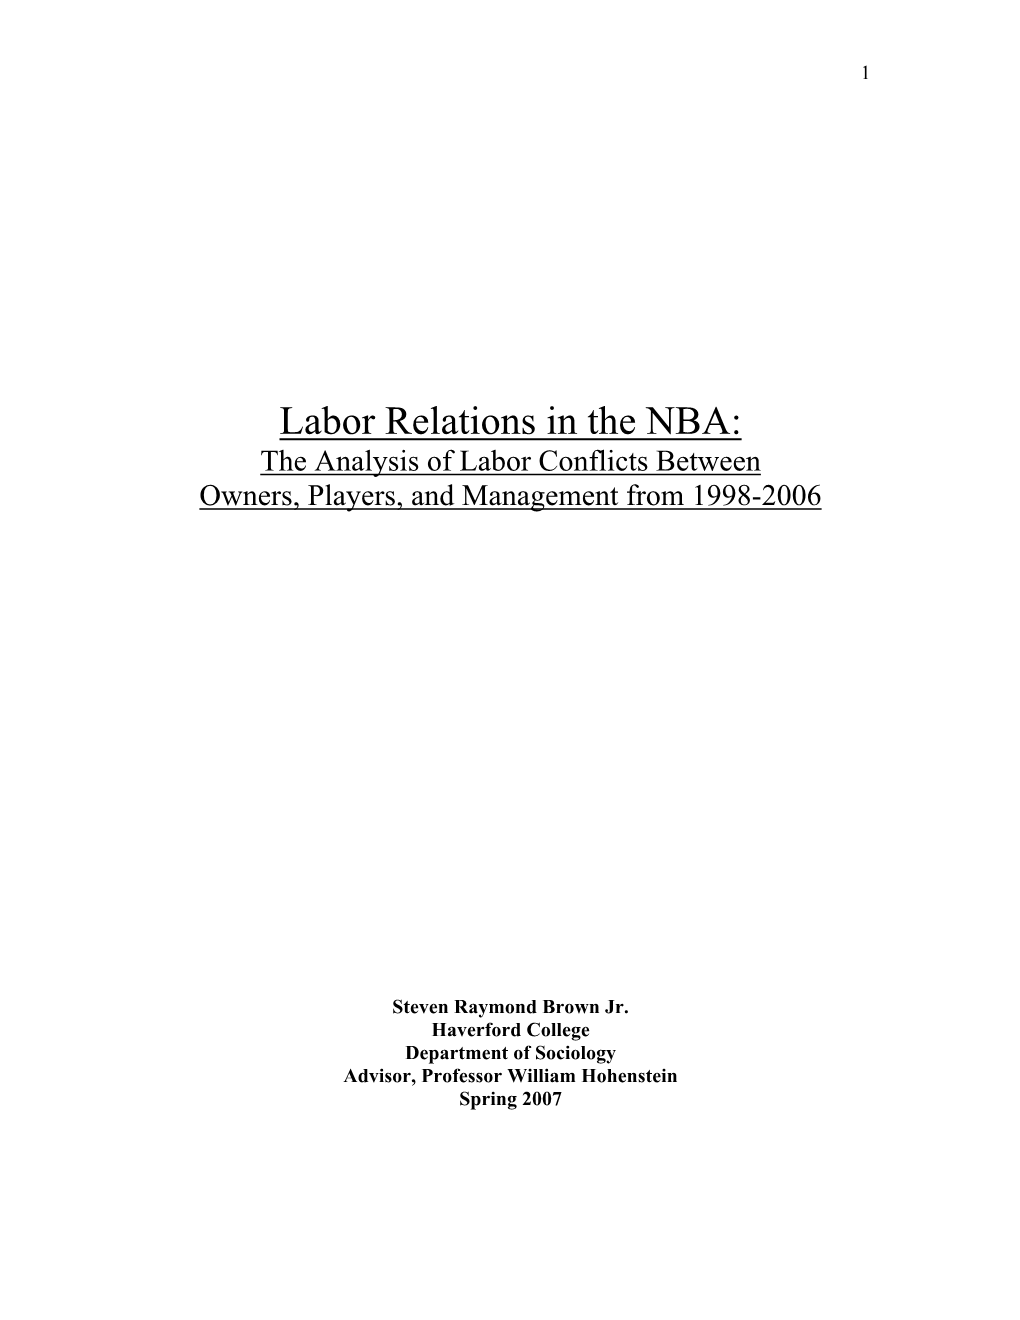 Labor Relations in the NBA: the Analysis of Labor Conflicts Between Owners, Players, and Management from 1998-2006